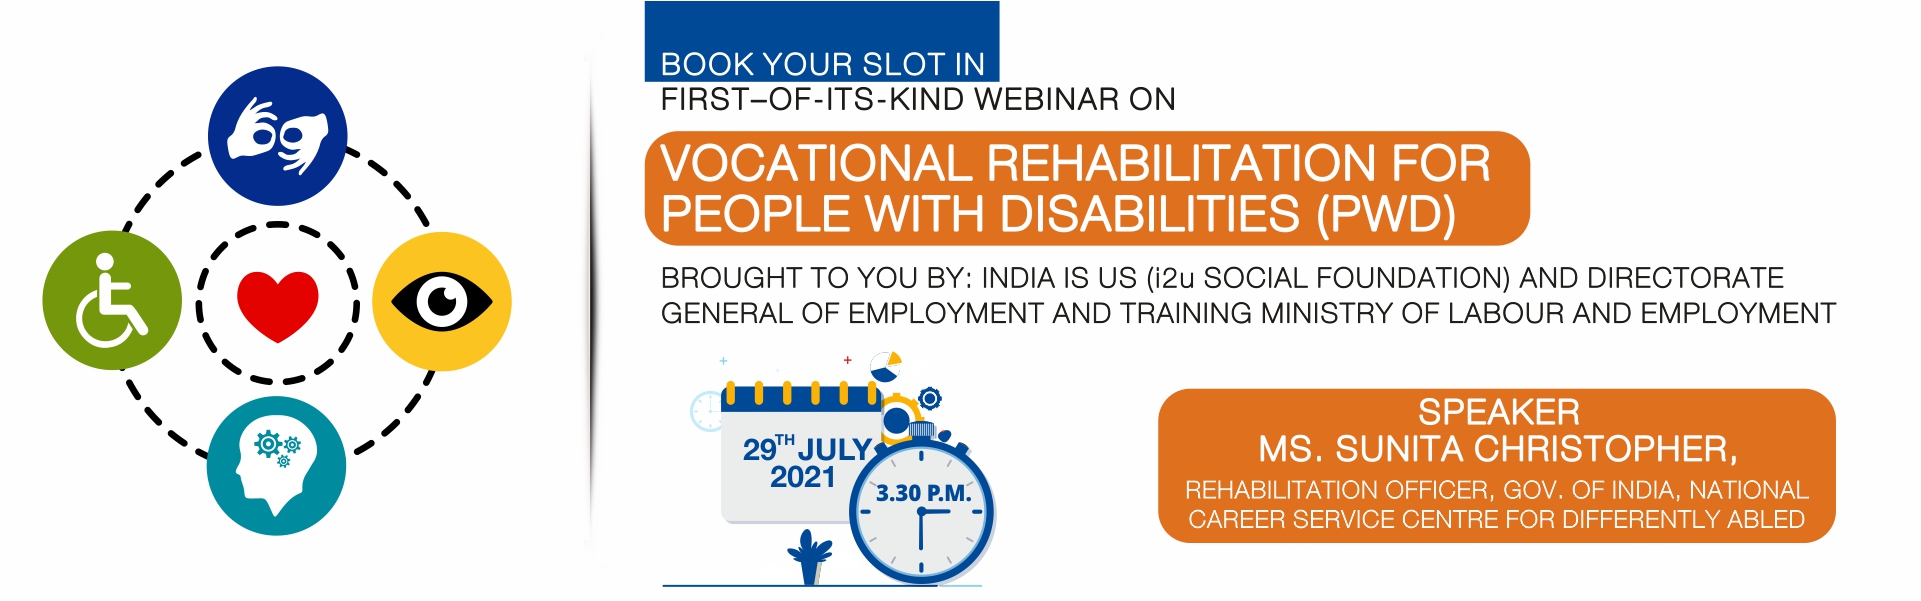 Vocational Rehabilitation for People With Disabilities (PWD)